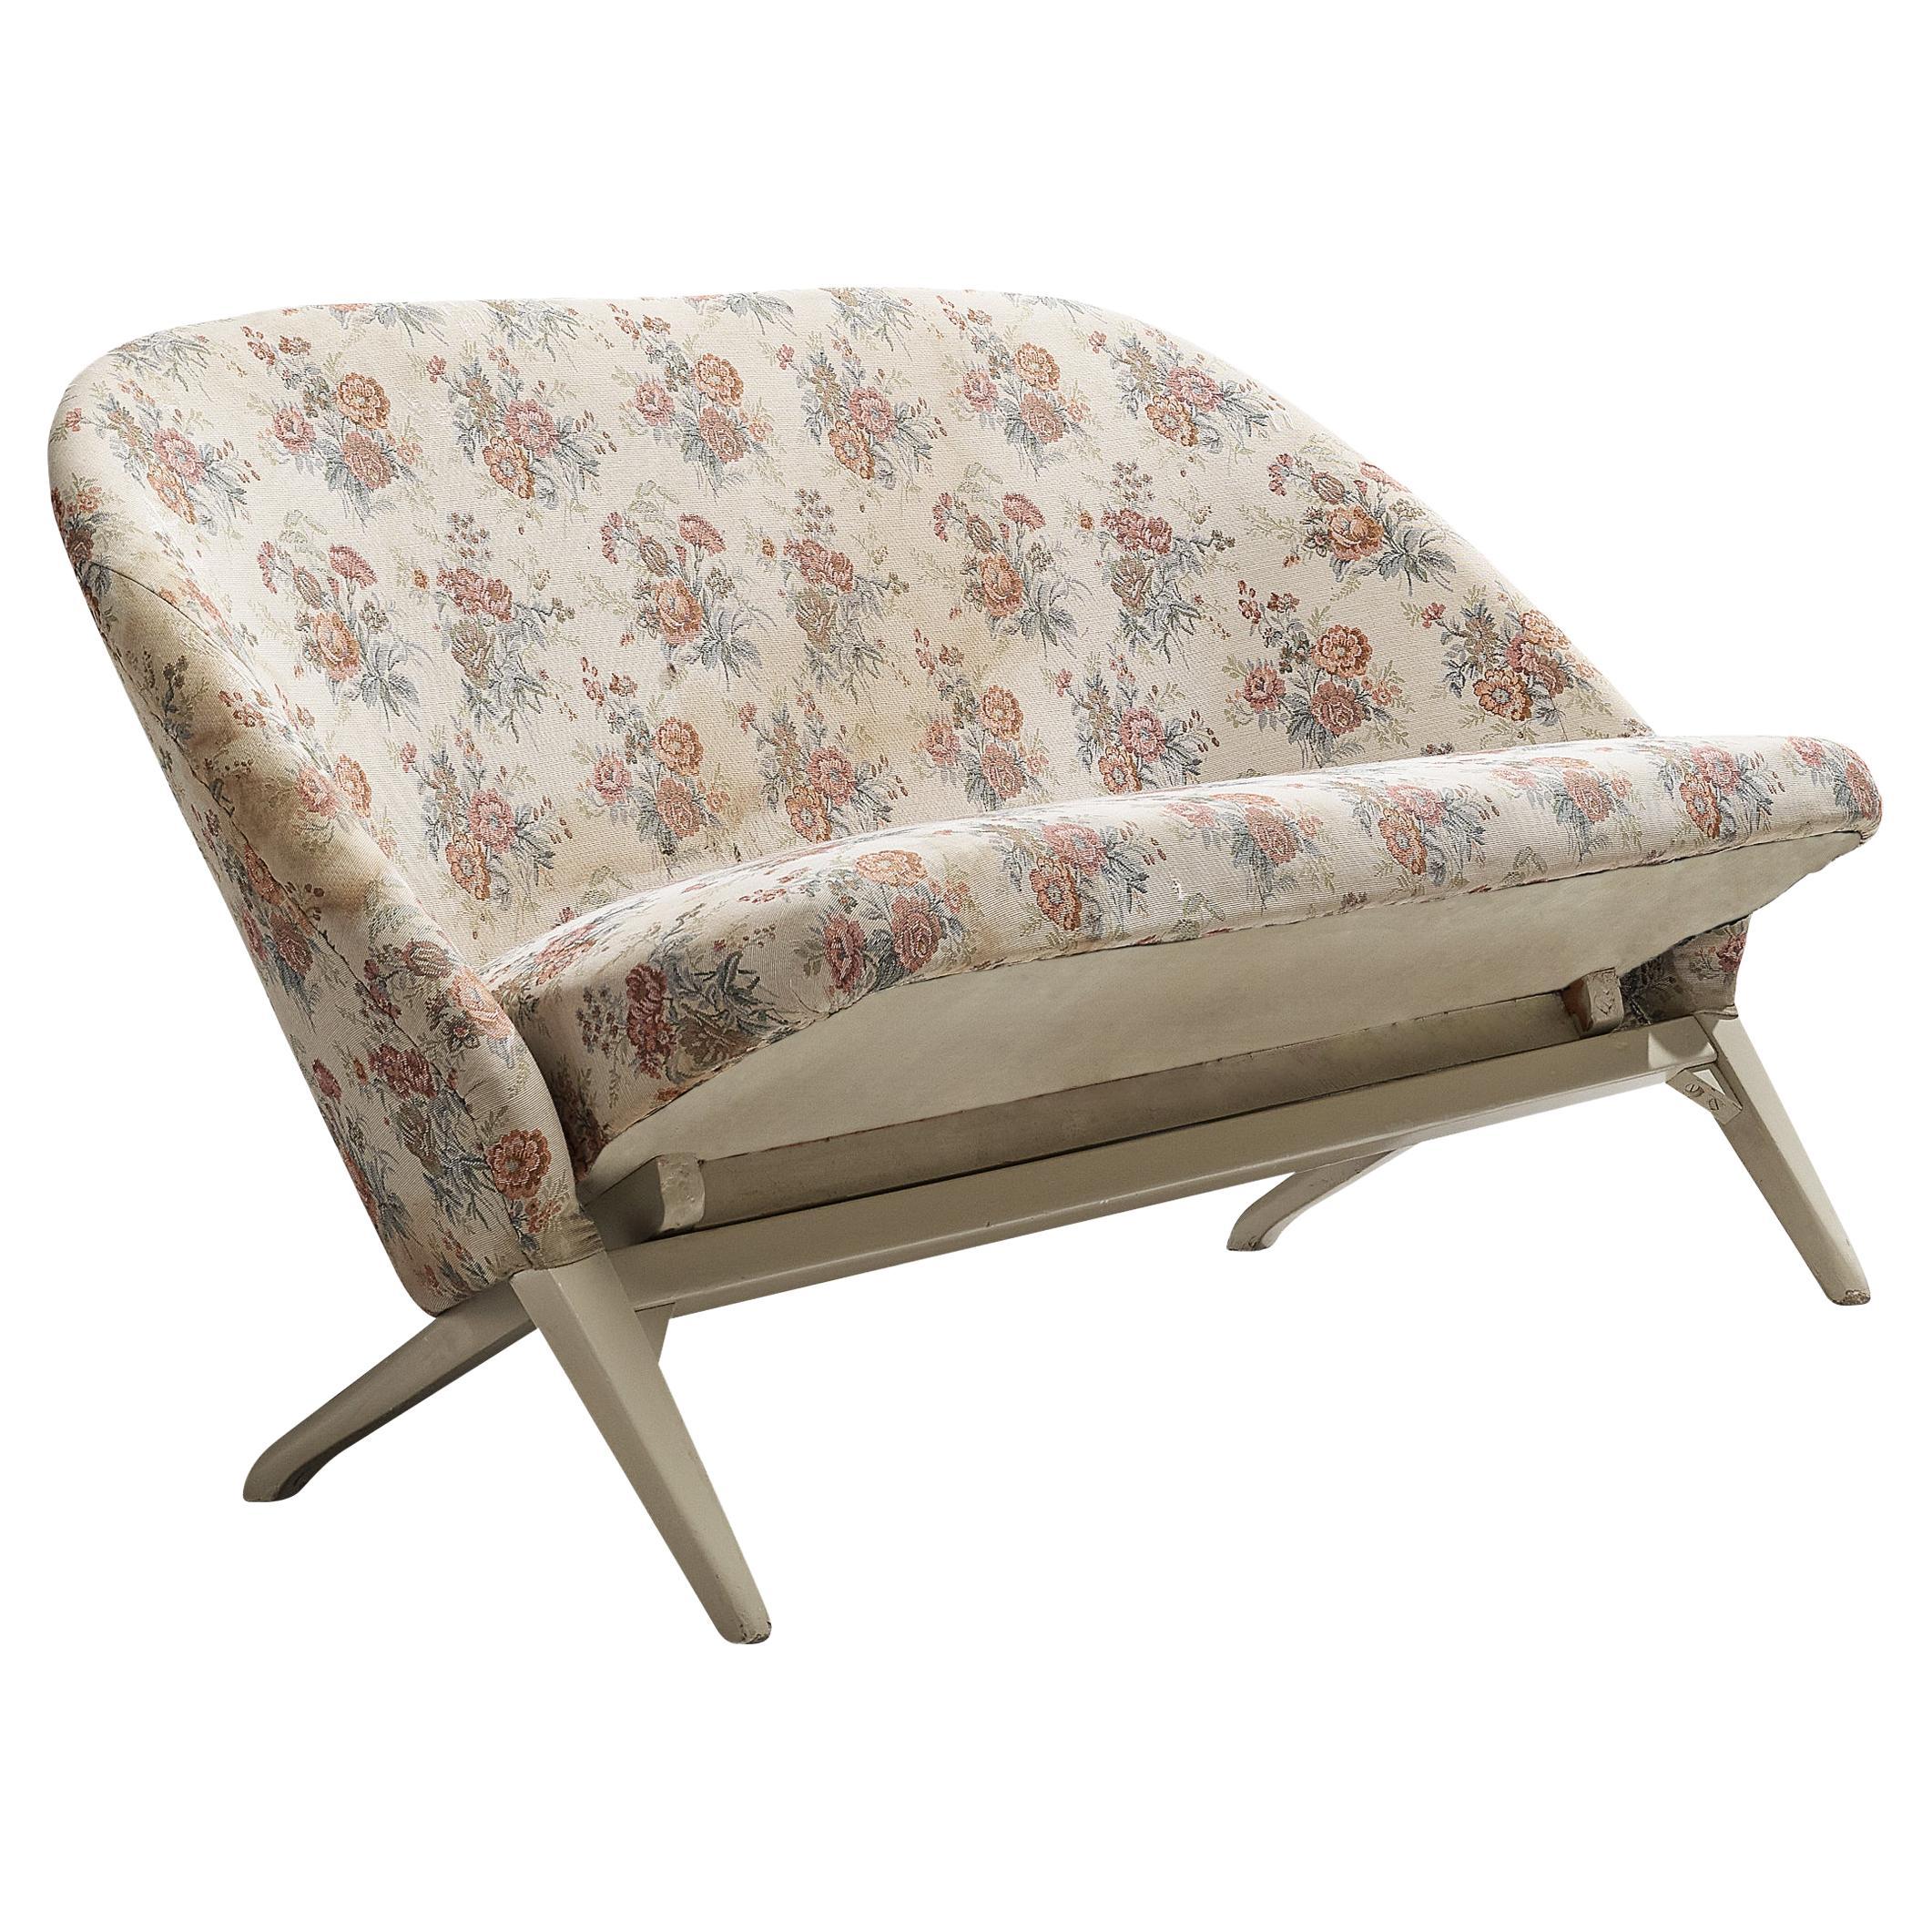 Theo Ruth for Artifort Congo Sofa in Floral Upholstery For Sale